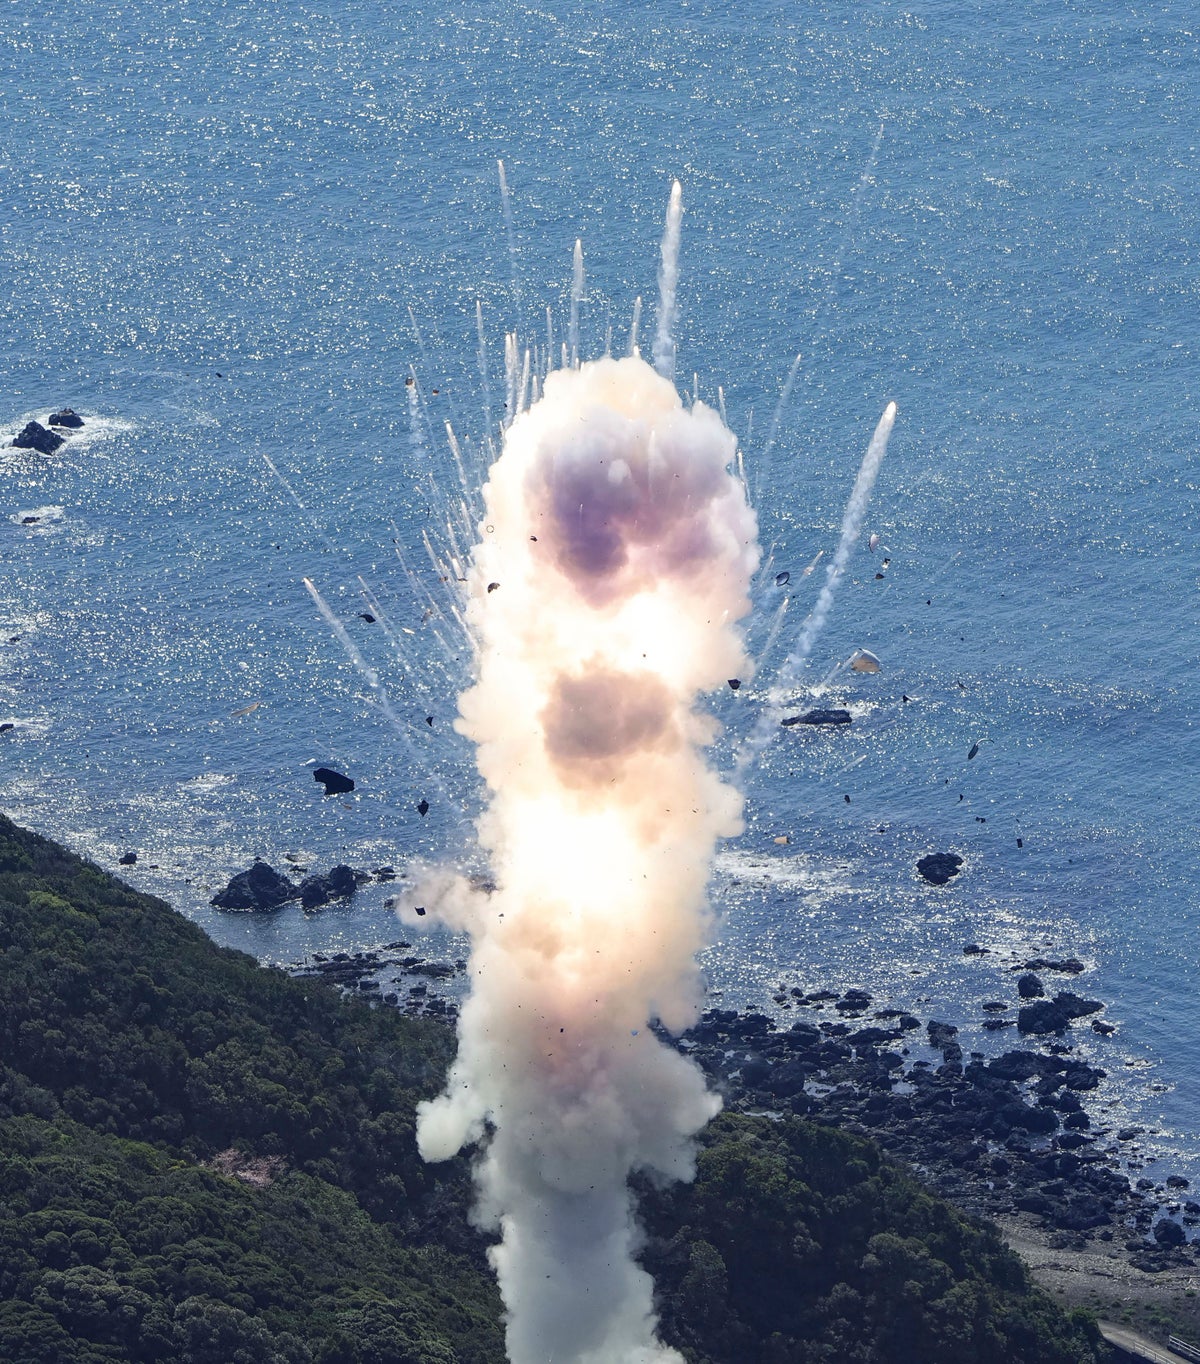 Japan’s first private-sector rocket launch attempt has exploded shortly after takeoff